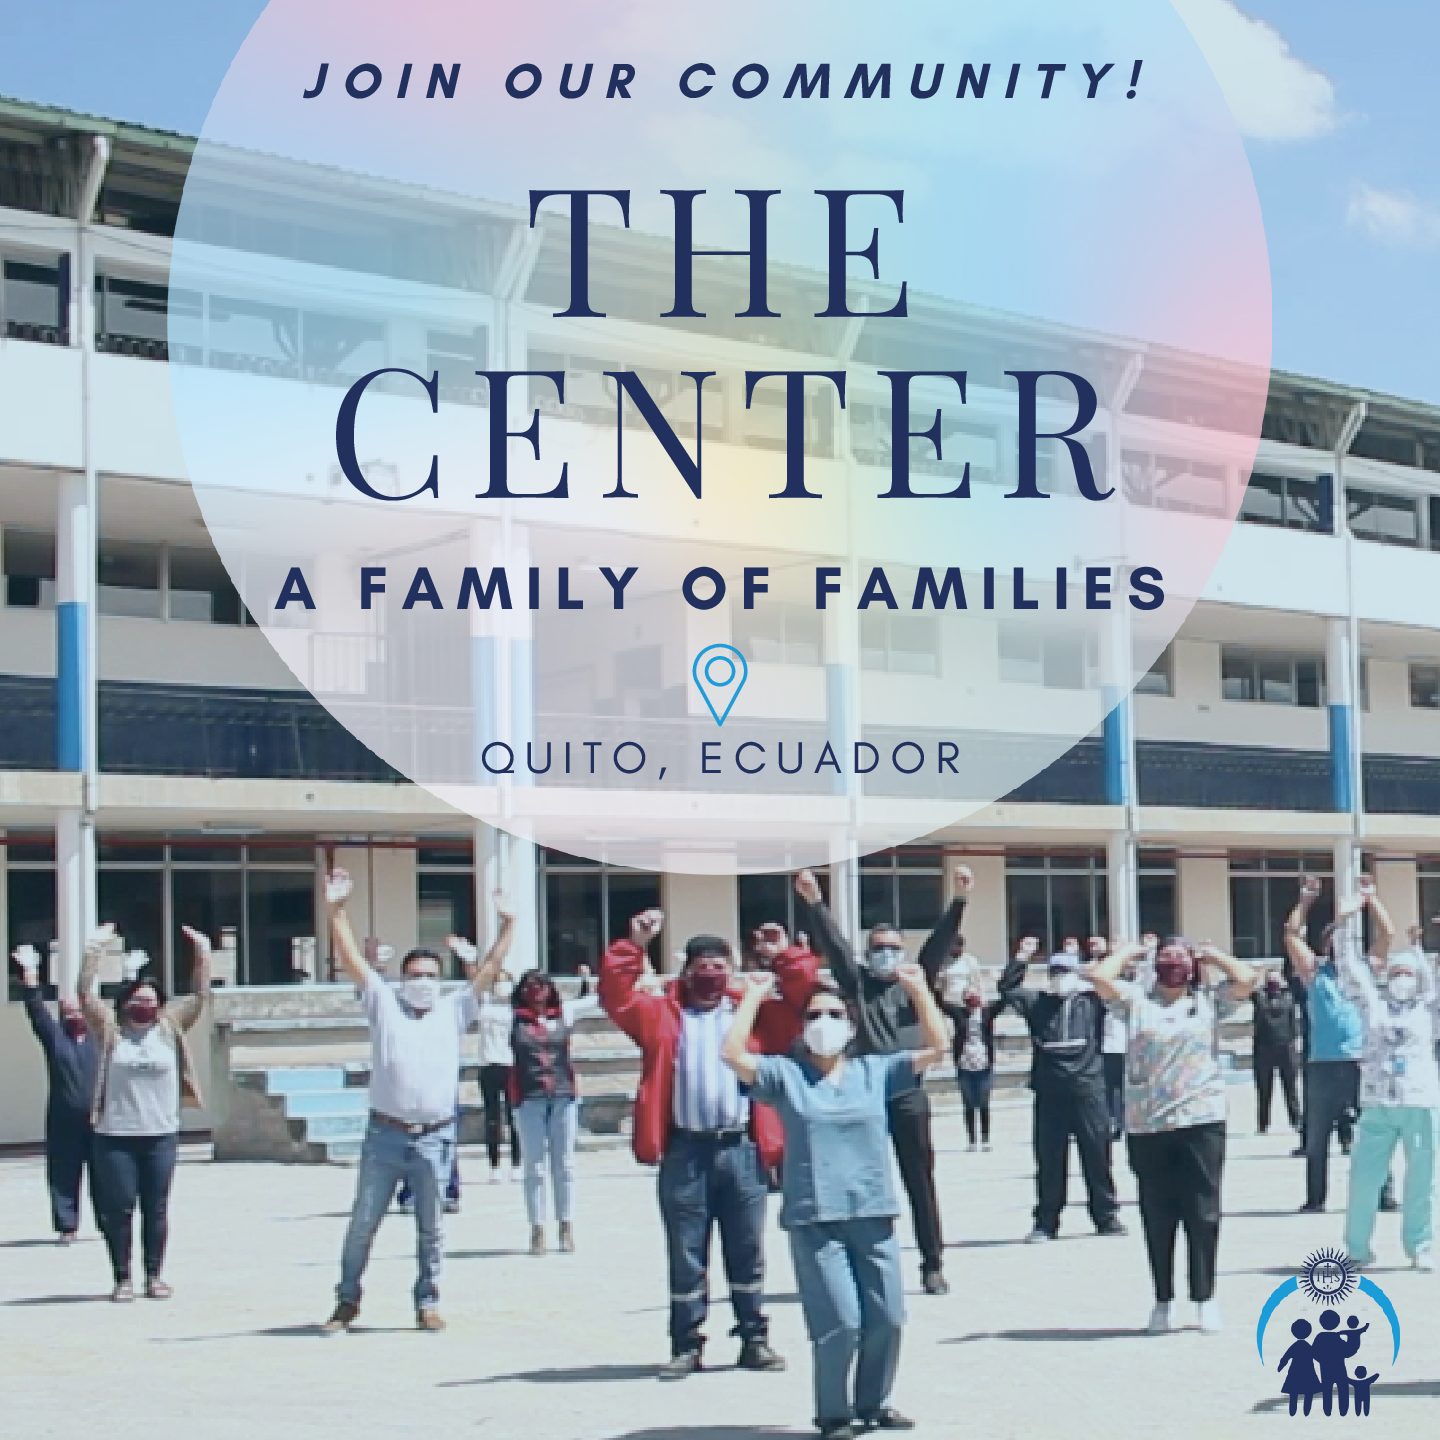 The Center for Working Families (C4WF) in collaboration with The Center – A Family of Families